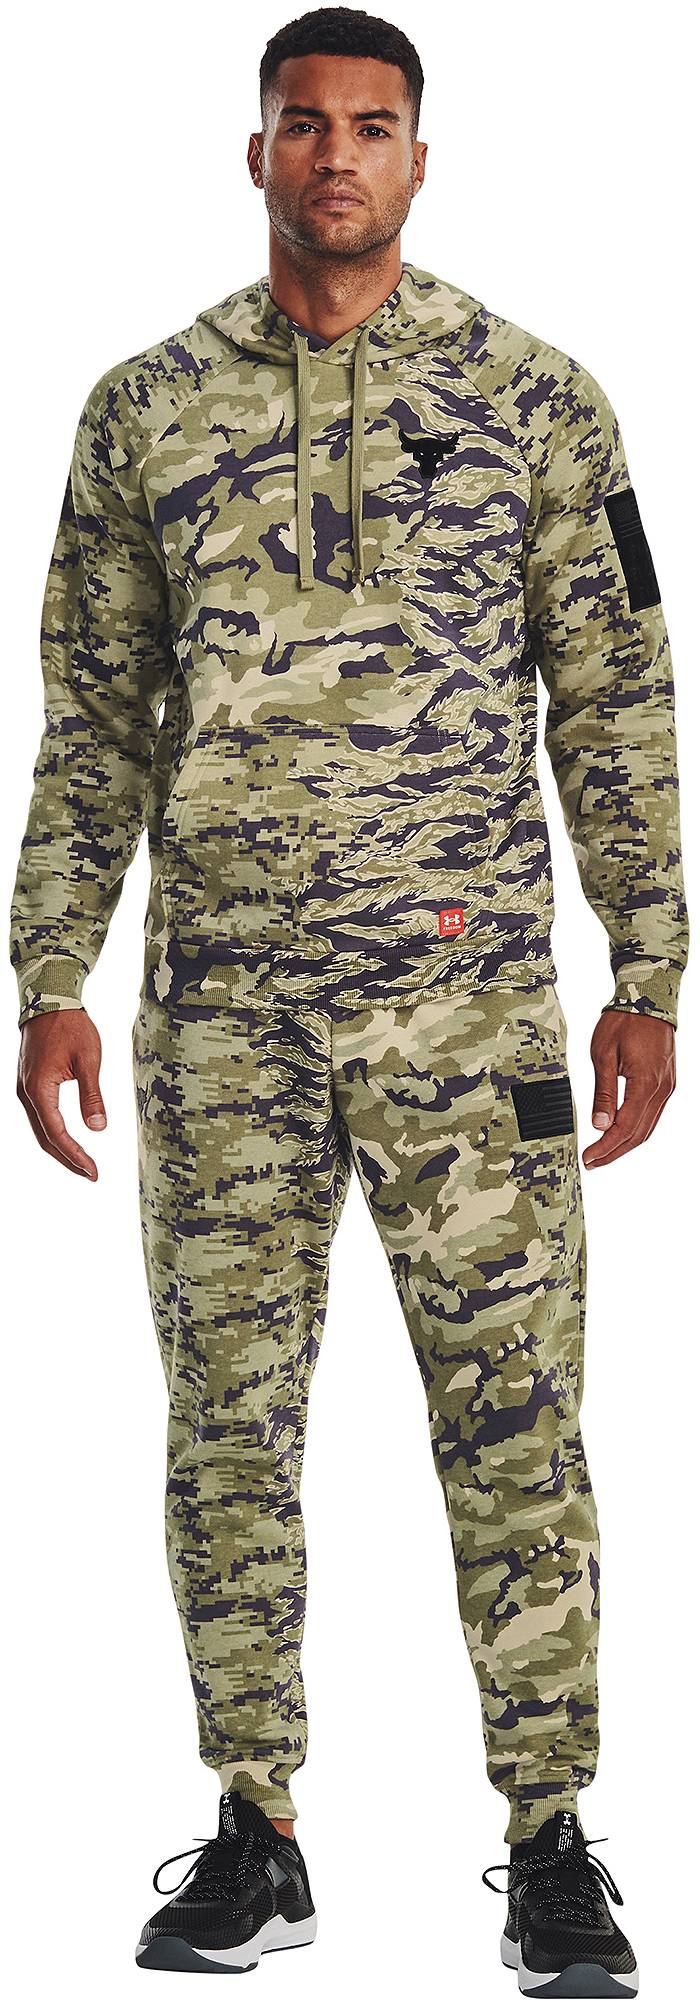 Under Armour Military & Veterans Discount